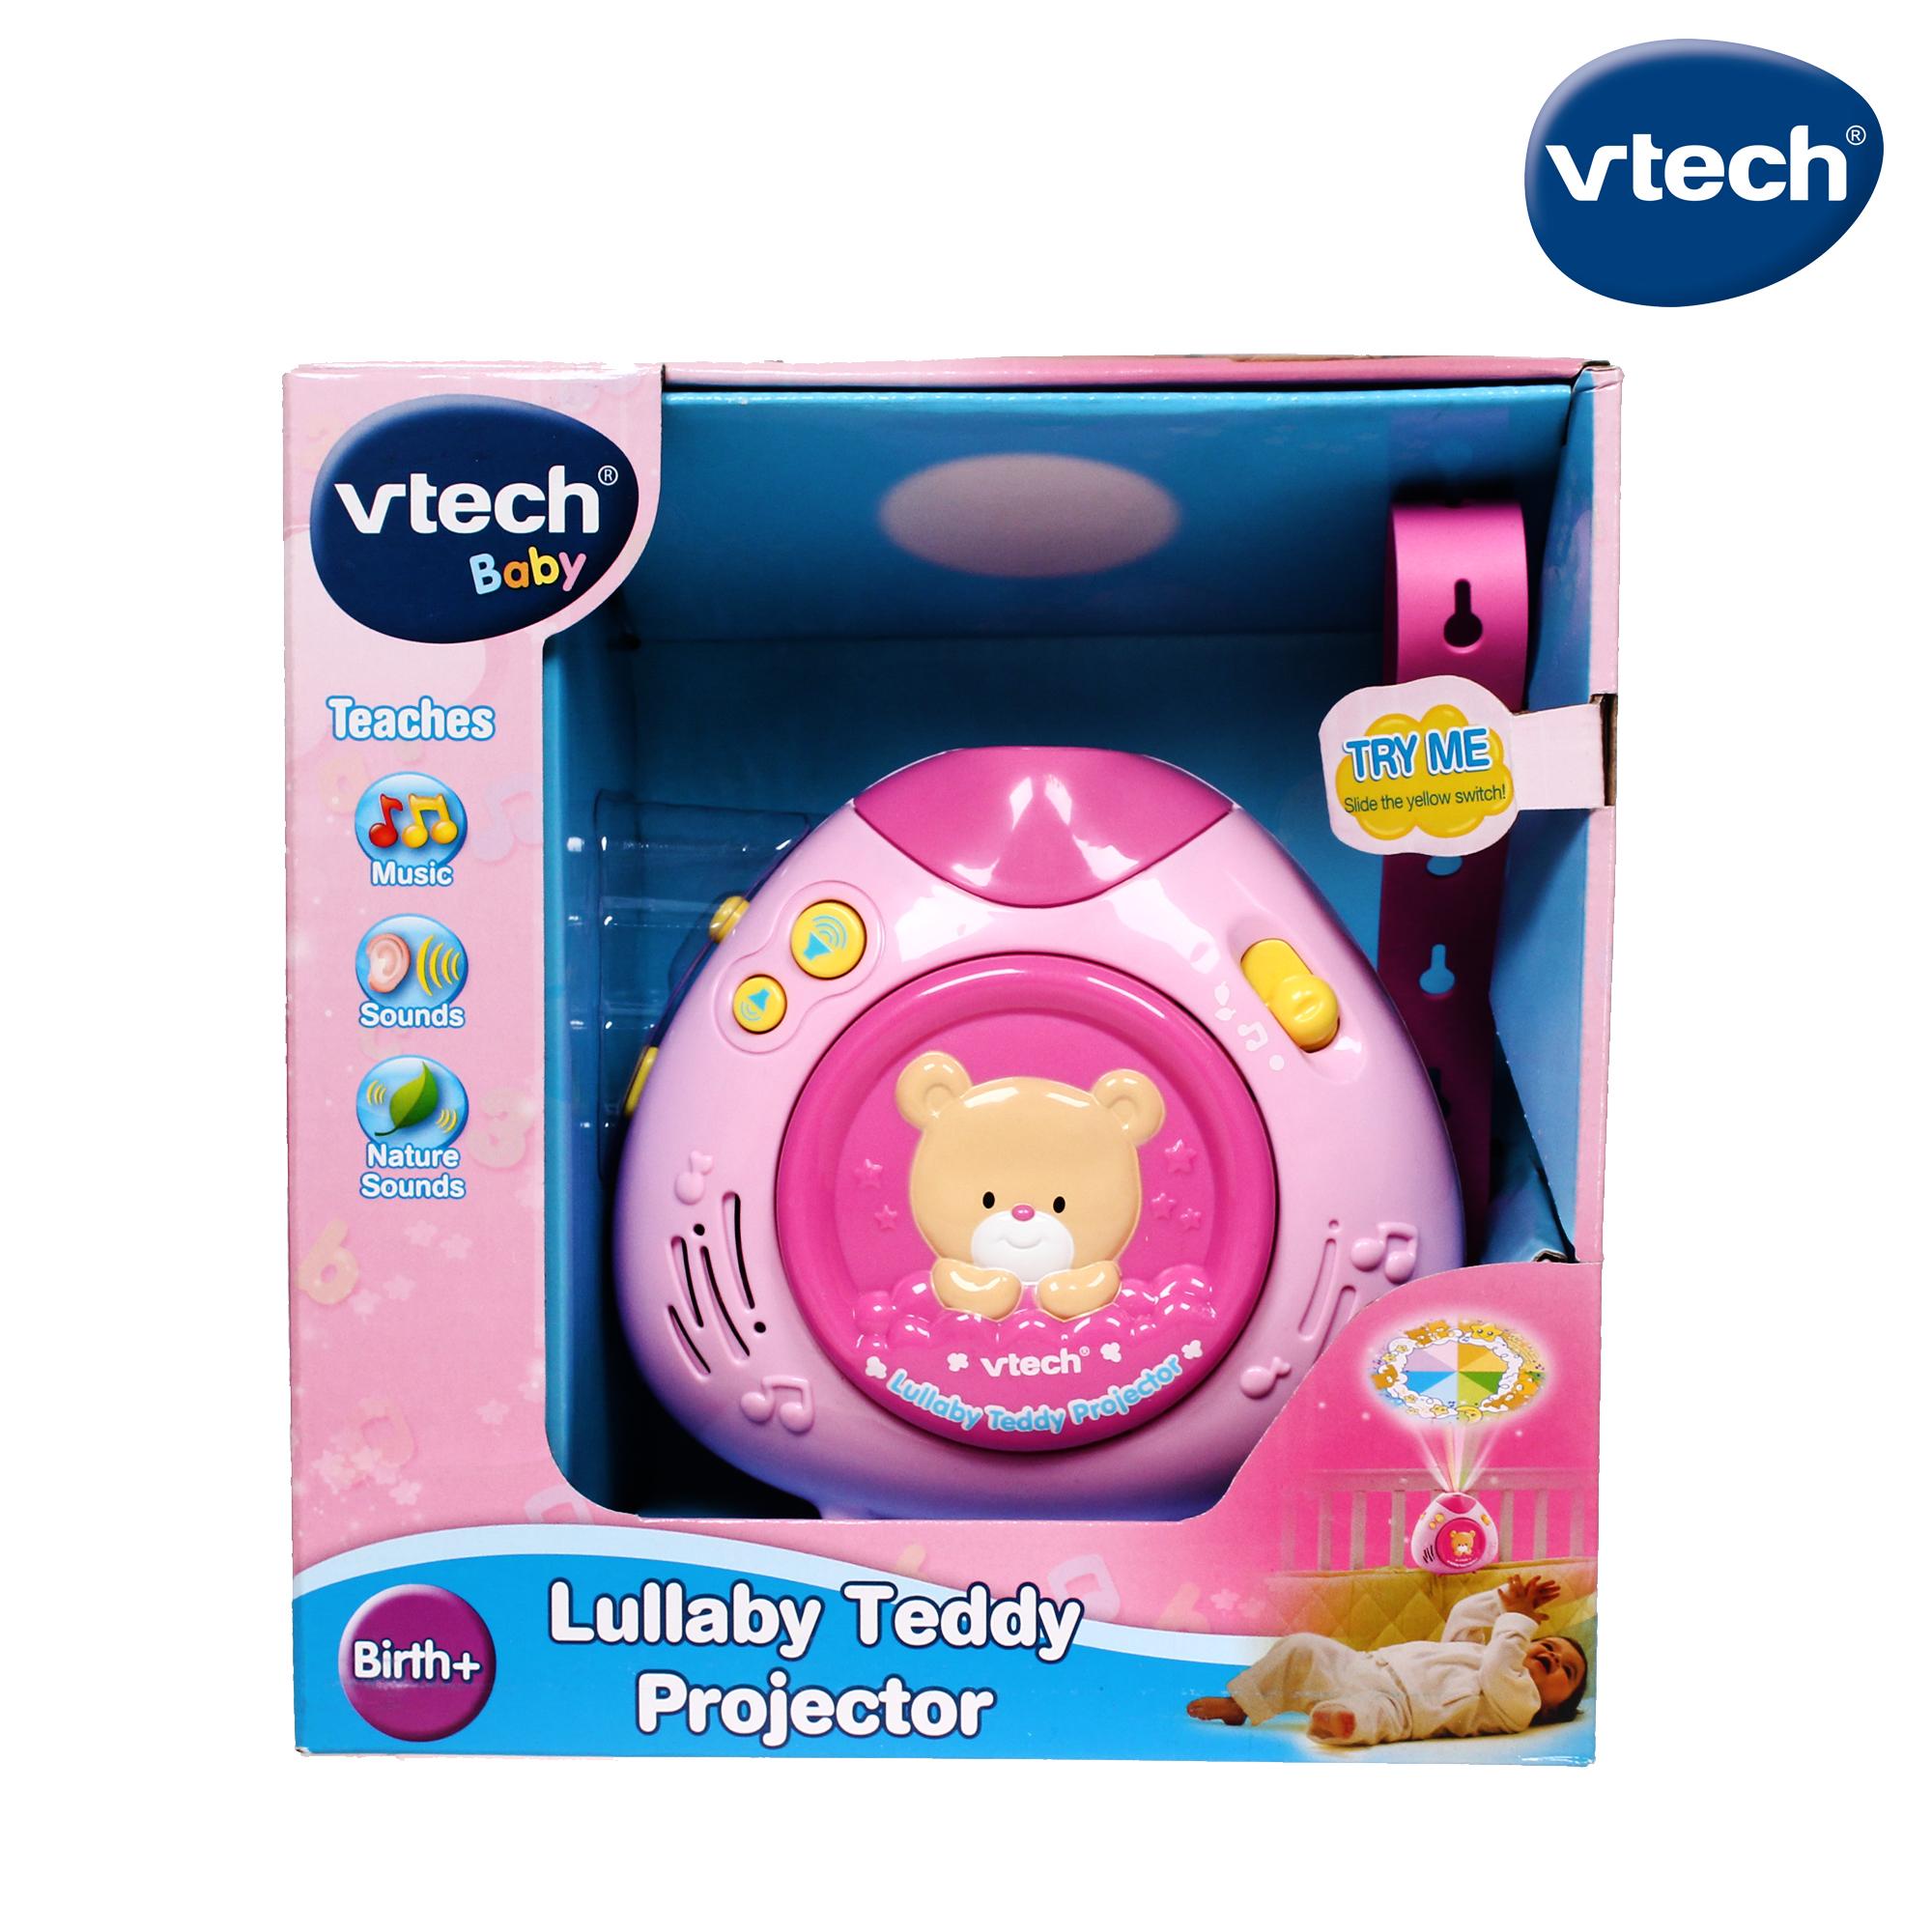 vtech lullaby teddy projector price